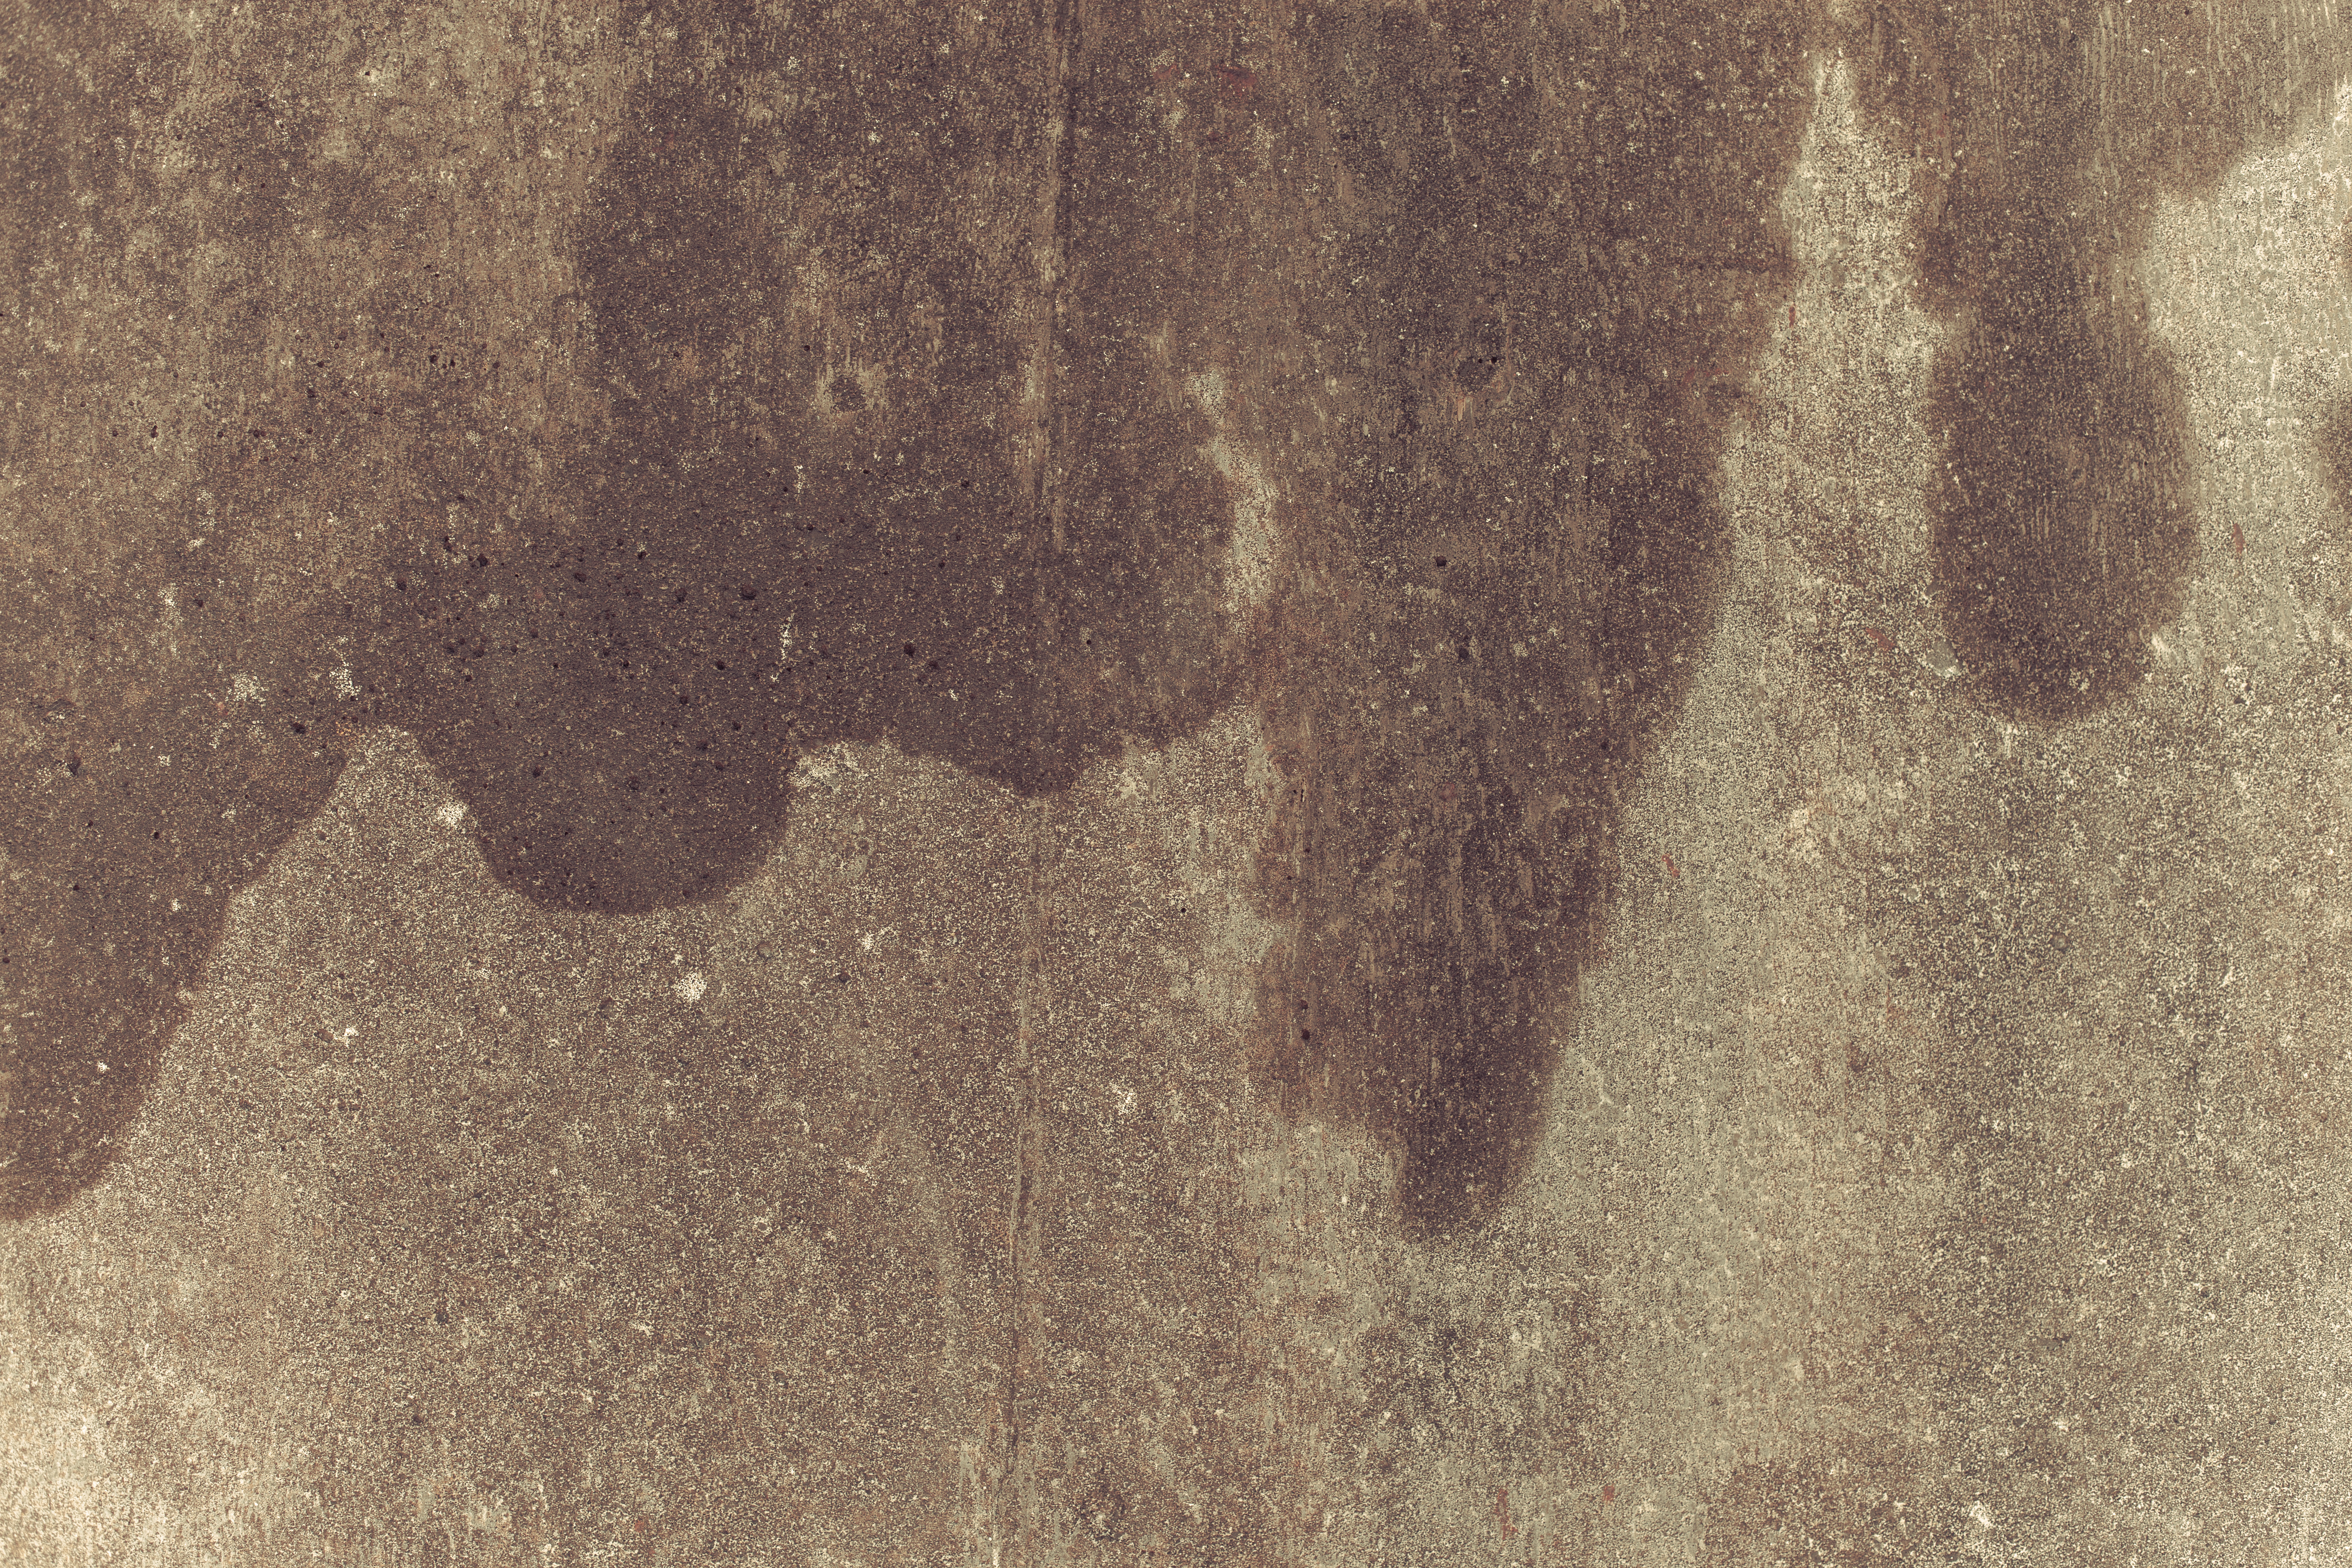 Brown stained concrete texture photo